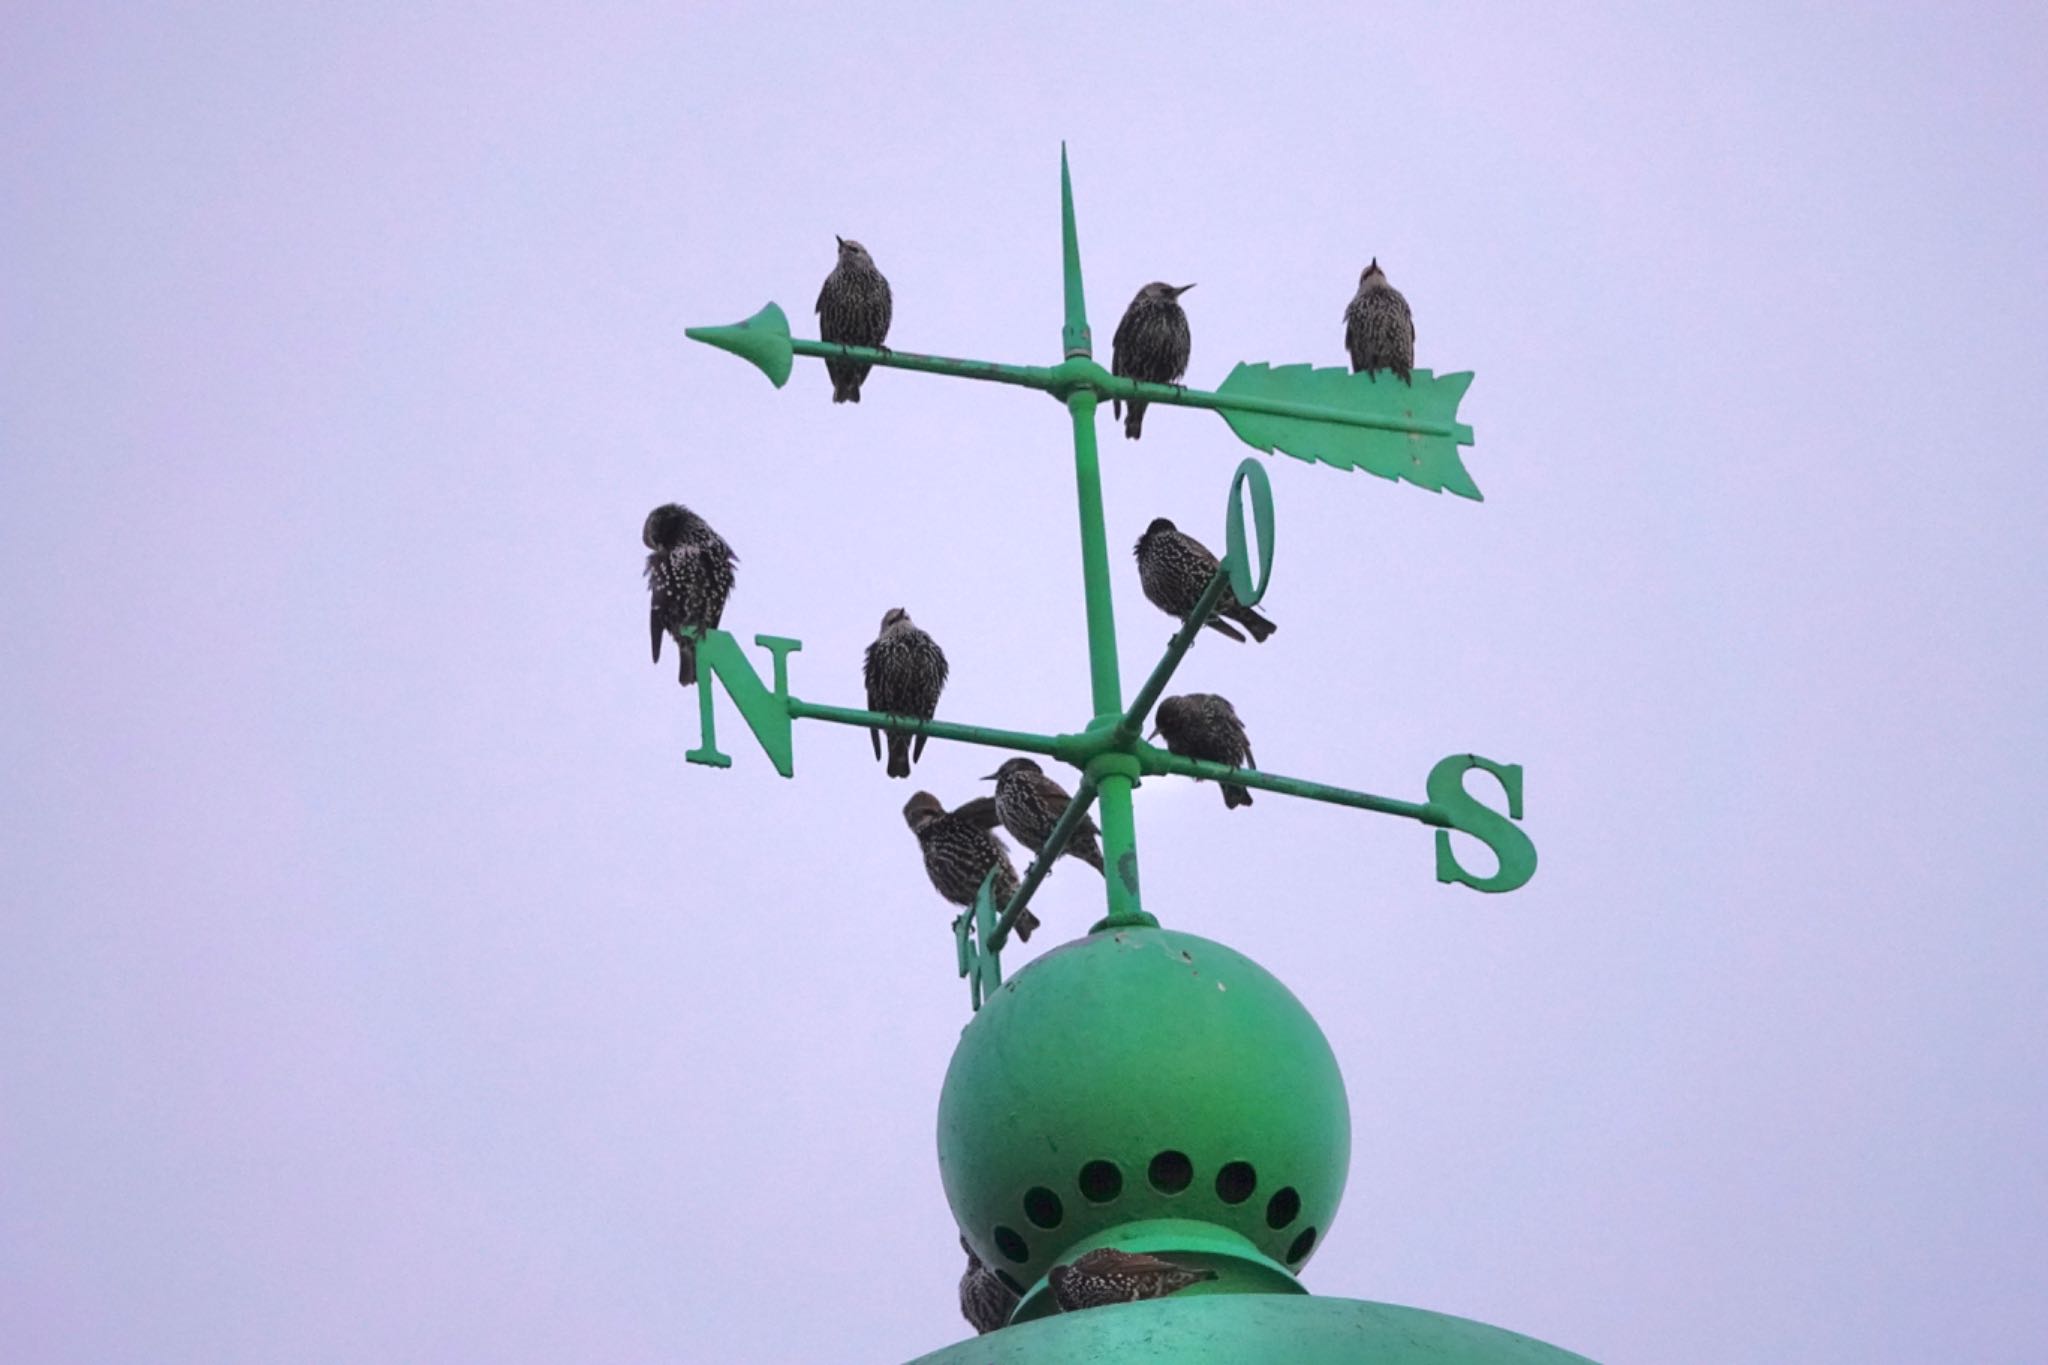 Photo of Common Starling at La Rochelle by のどか